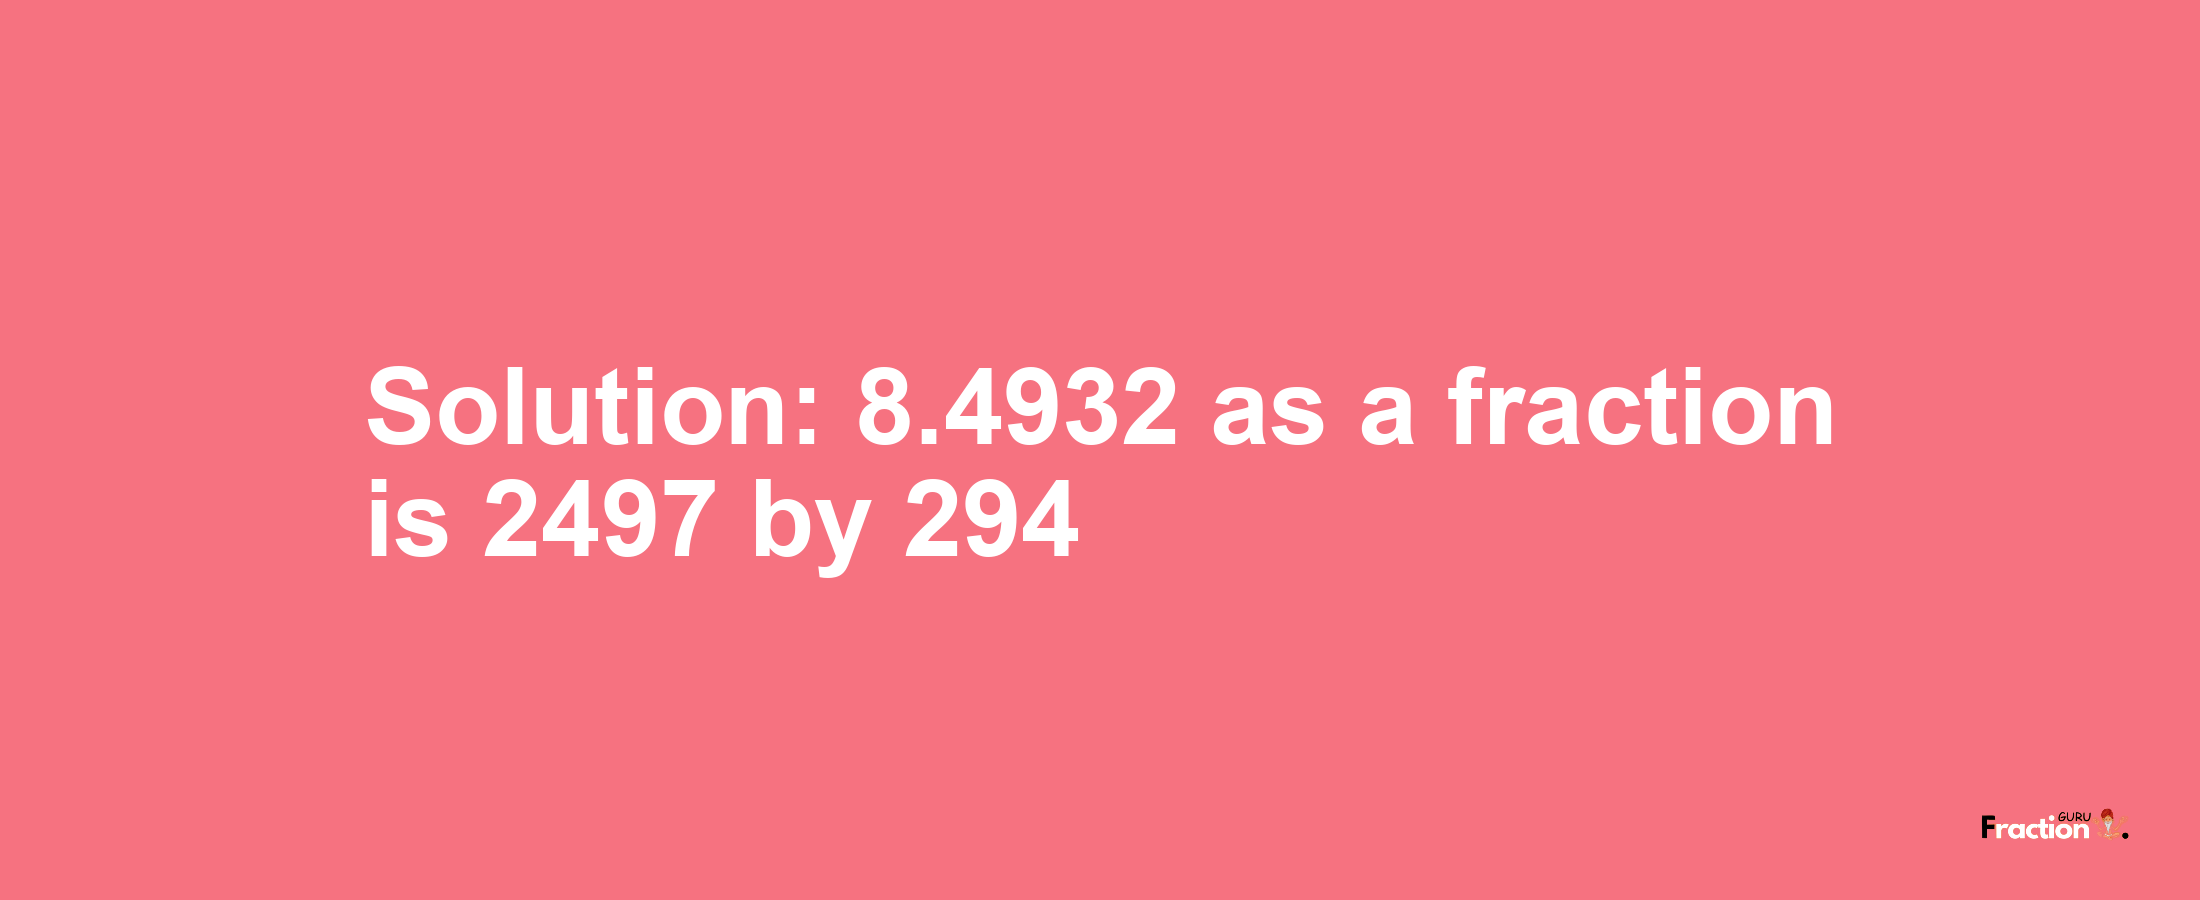 Solution:8.4932 as a fraction is 2497/294